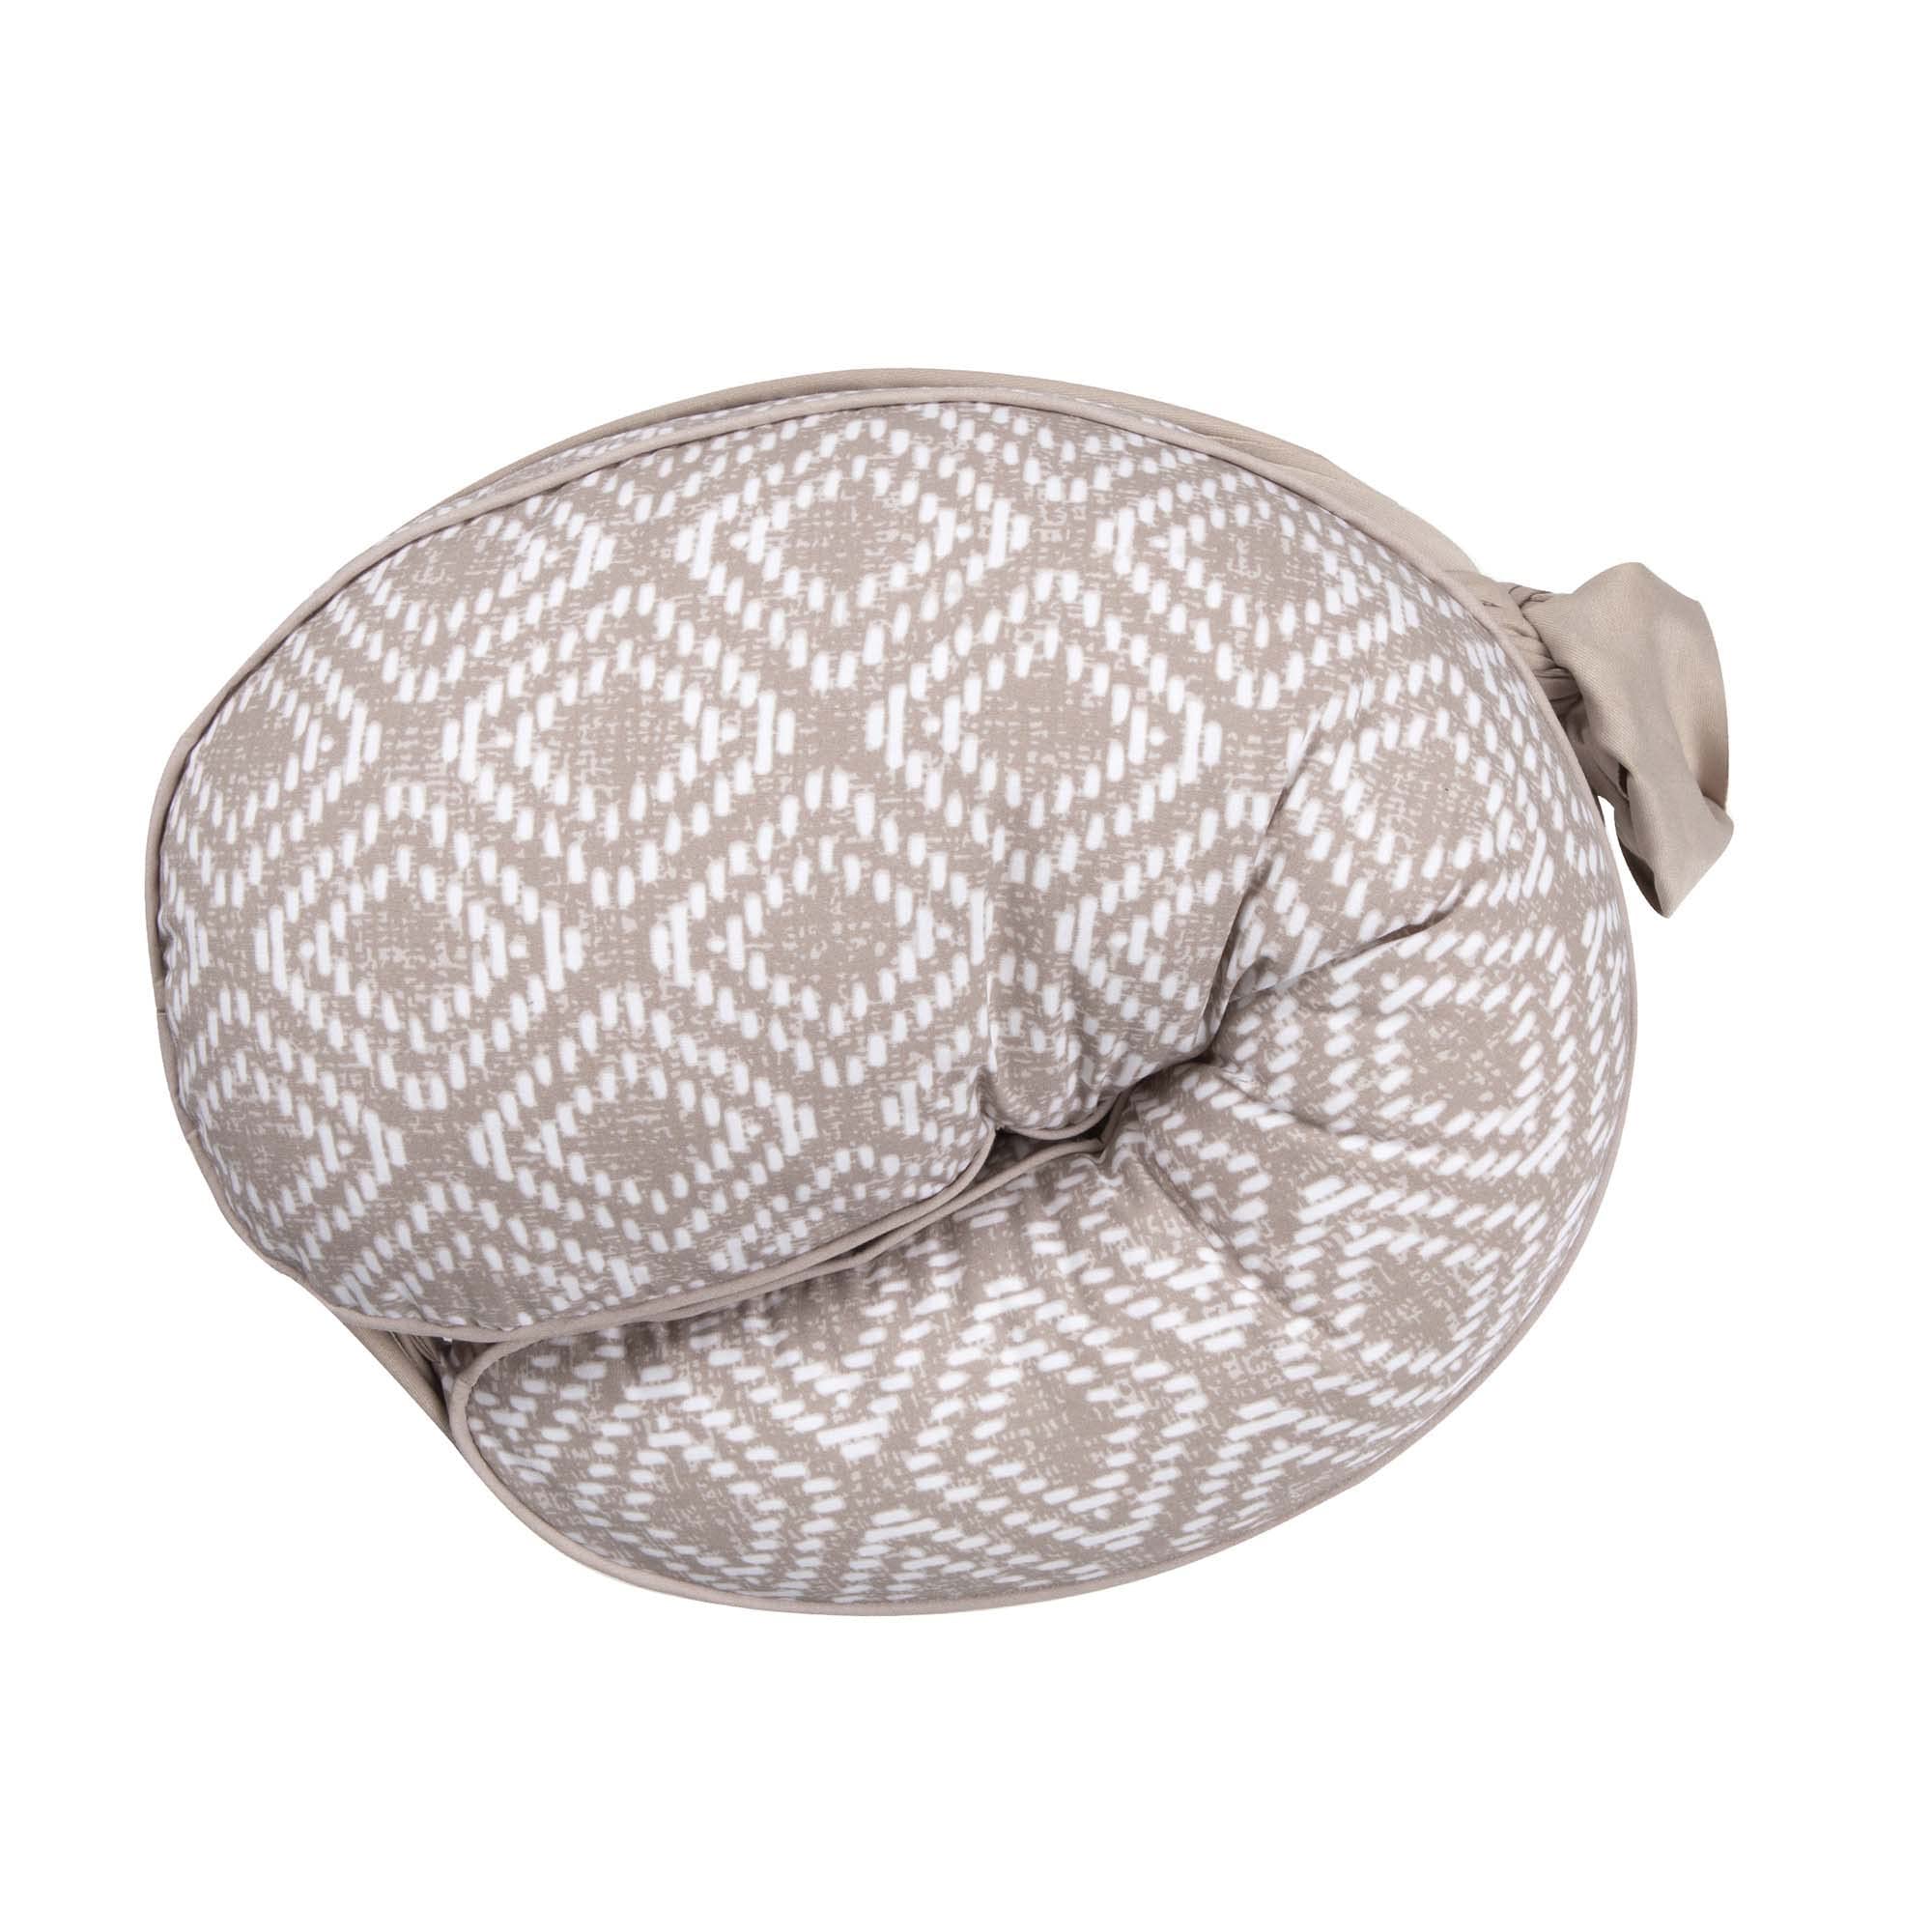 Boppy Anywhere Support Nursing Pillow, Latte Rattan with Stretch Belt that Stores Small, Breastfeeding and Bottle-feeding Support at Home and for Travel, Plus Sized to Petite, Machine Washable